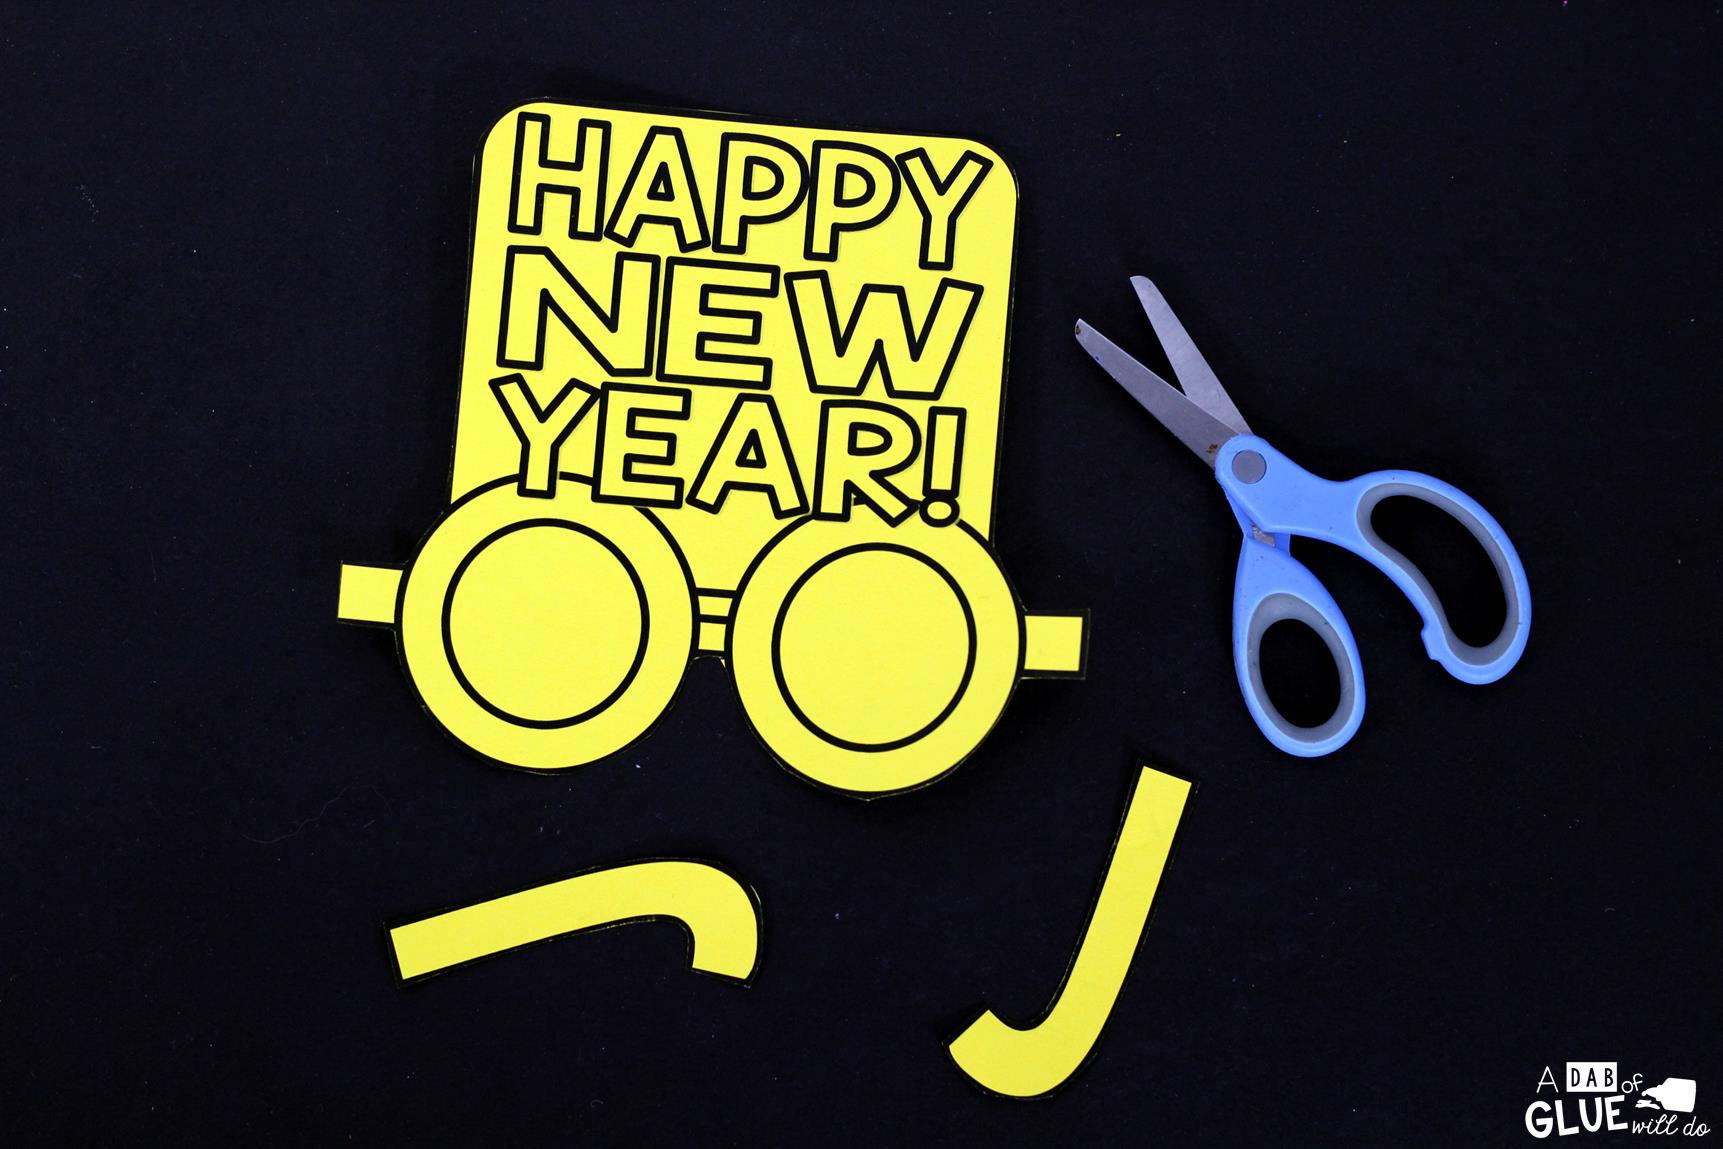 New Year's Eve Glasses and Writing printable is the perfect way to ring in the new year. Whether you are celebrating New Year's Eve or teaching your students about new year's traditions, these free glasses and writing printable will be a great addition. 